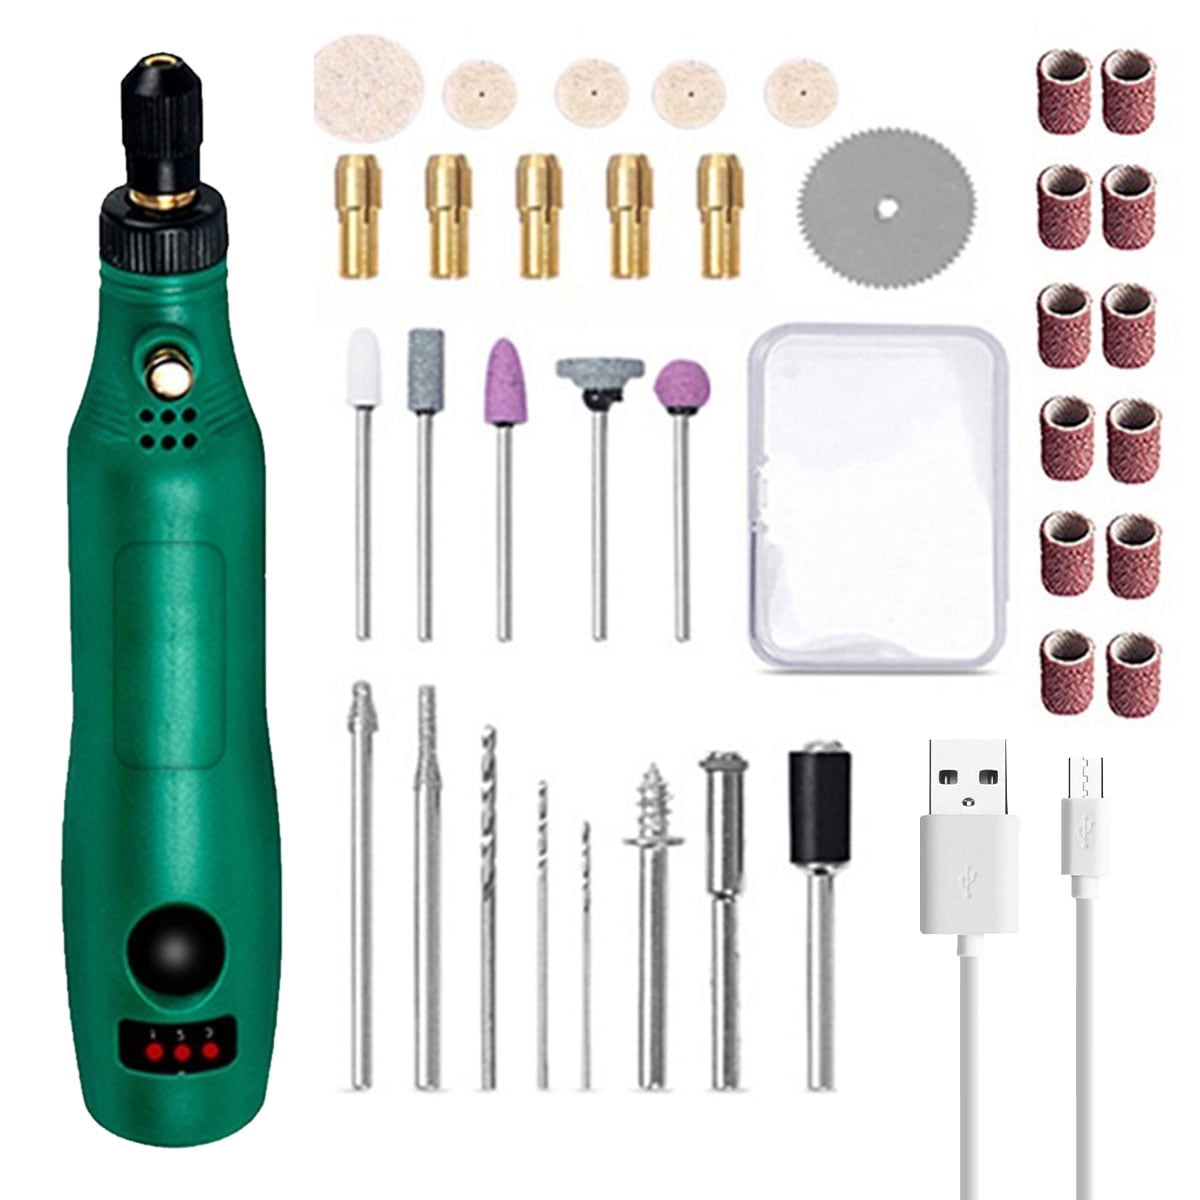 USB Mini Cordless Drill Rotary Tools Kit Wireless Drill 3 Speed Electric  Carving Pen for Jewelry Polishing Carving Dremel Tools - AliExpress